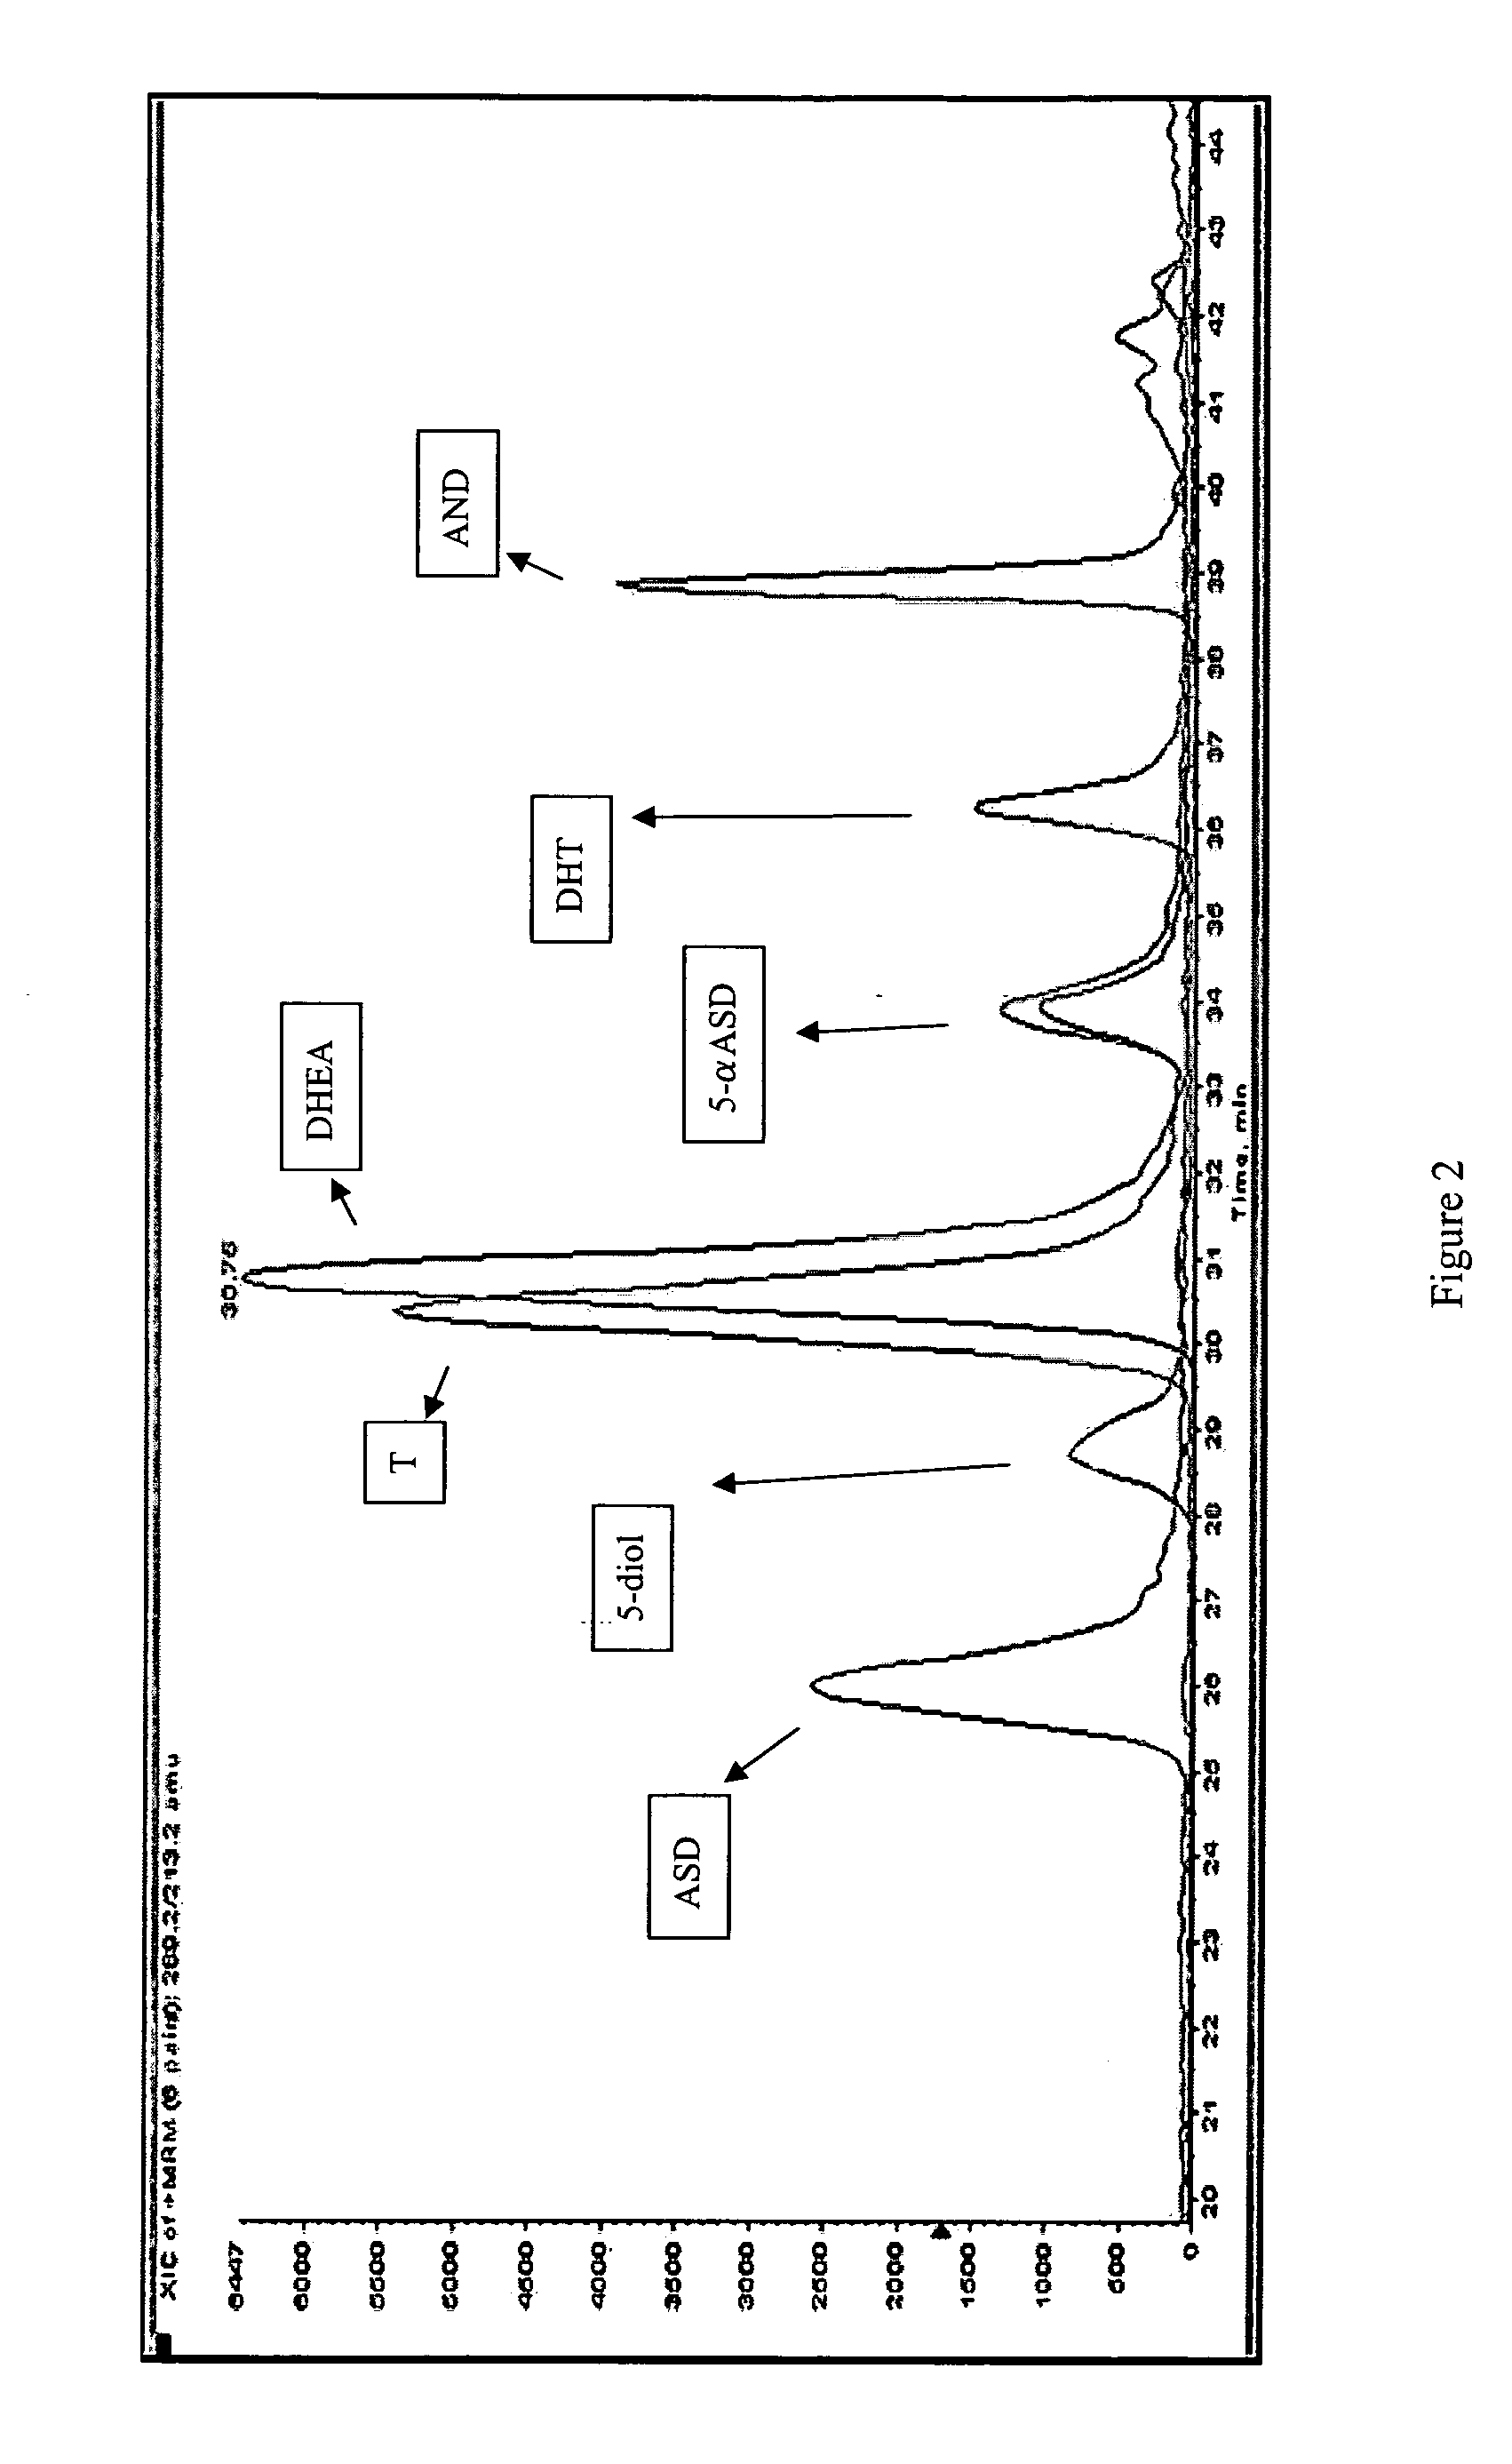 Method for determination of DHT levels in tissue samples